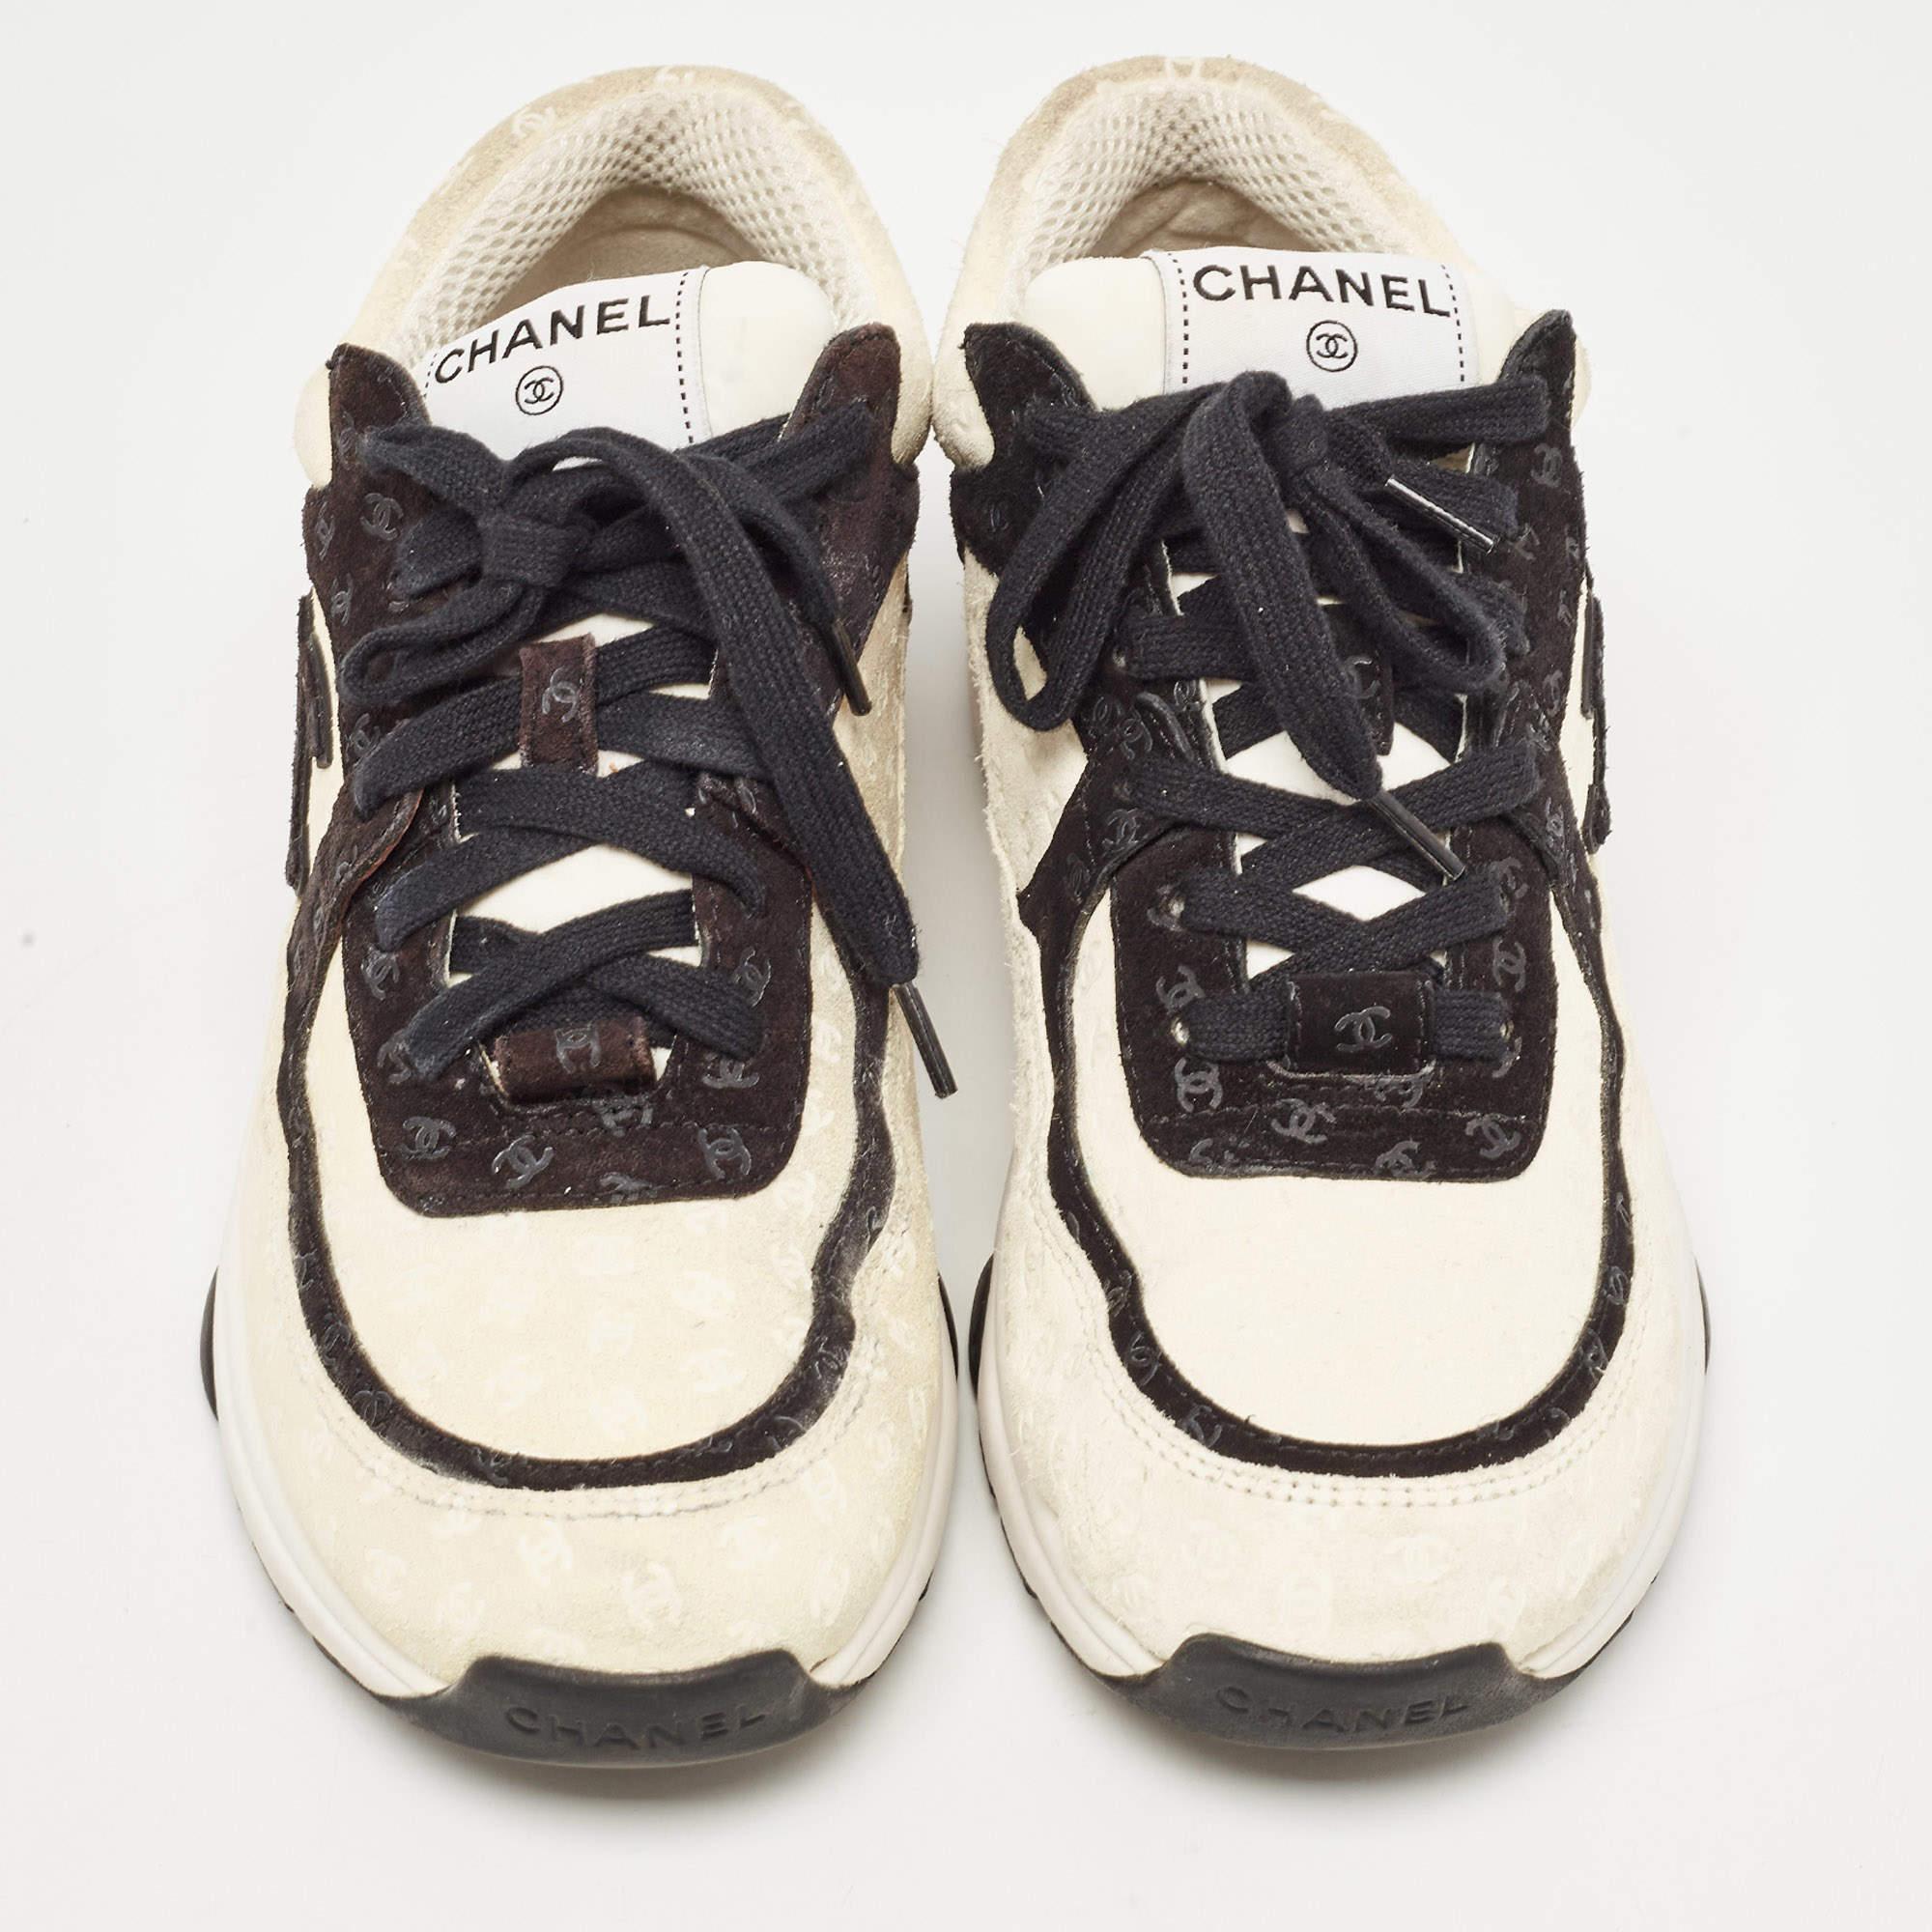 These sneakers from Chanel represent the best of fashion. They are crafted from high-quality materials and designed with nothing but style. A perfect fit for all casual occasions, these sneakers will spruce up any look effortlessly.

